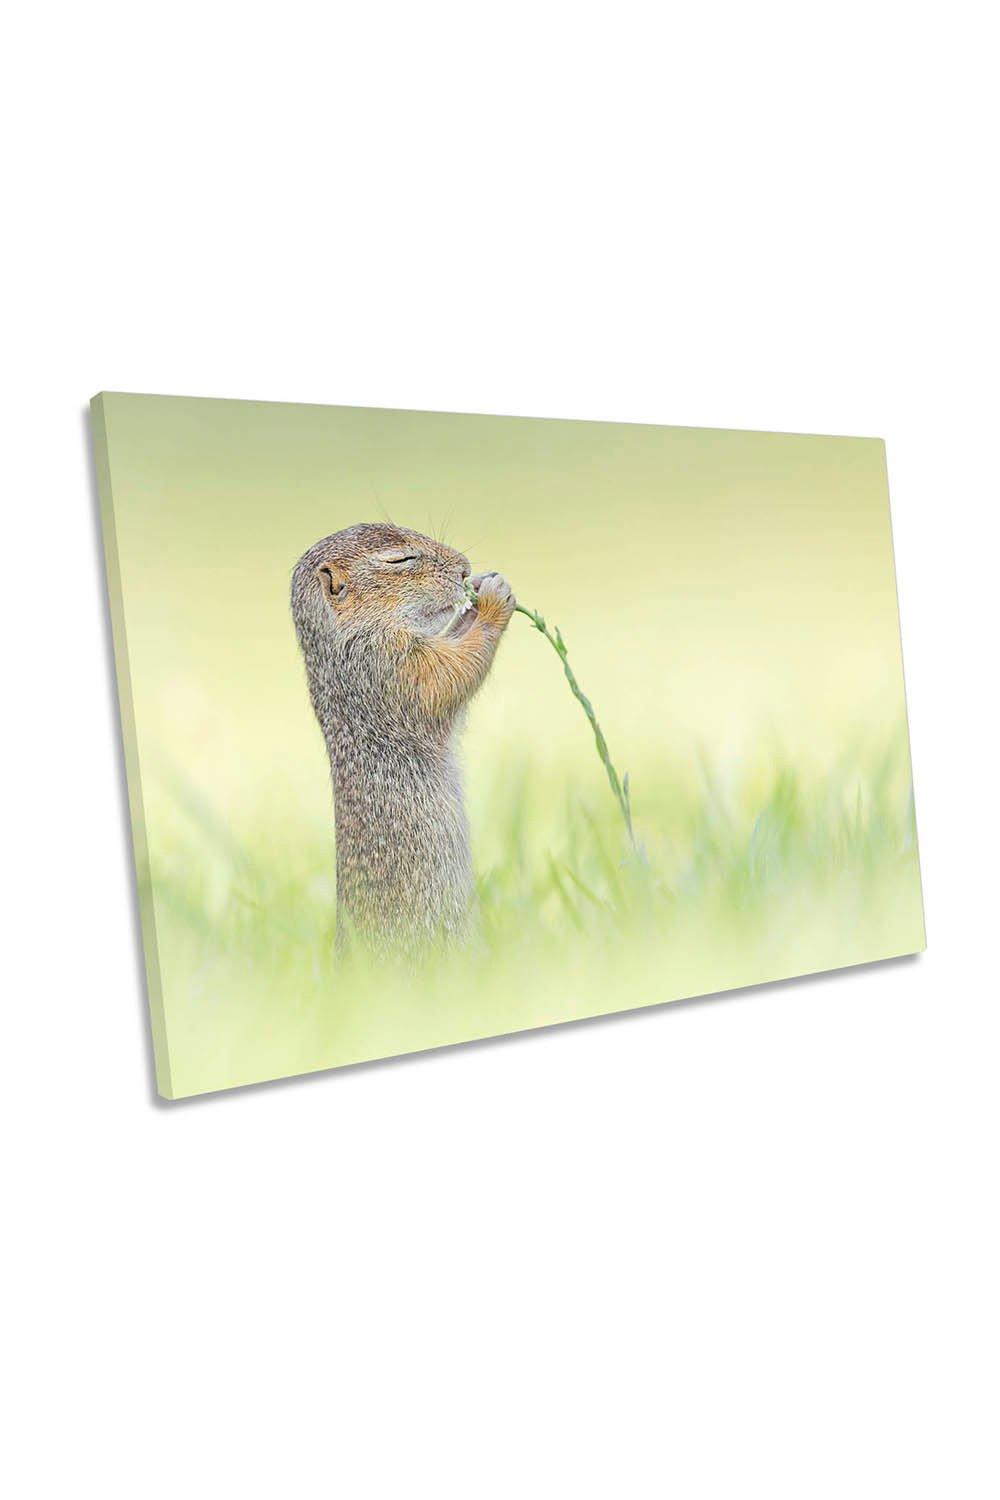 Cute Squirrel Smelling Flower Green Canvas Wall Art Picture Print